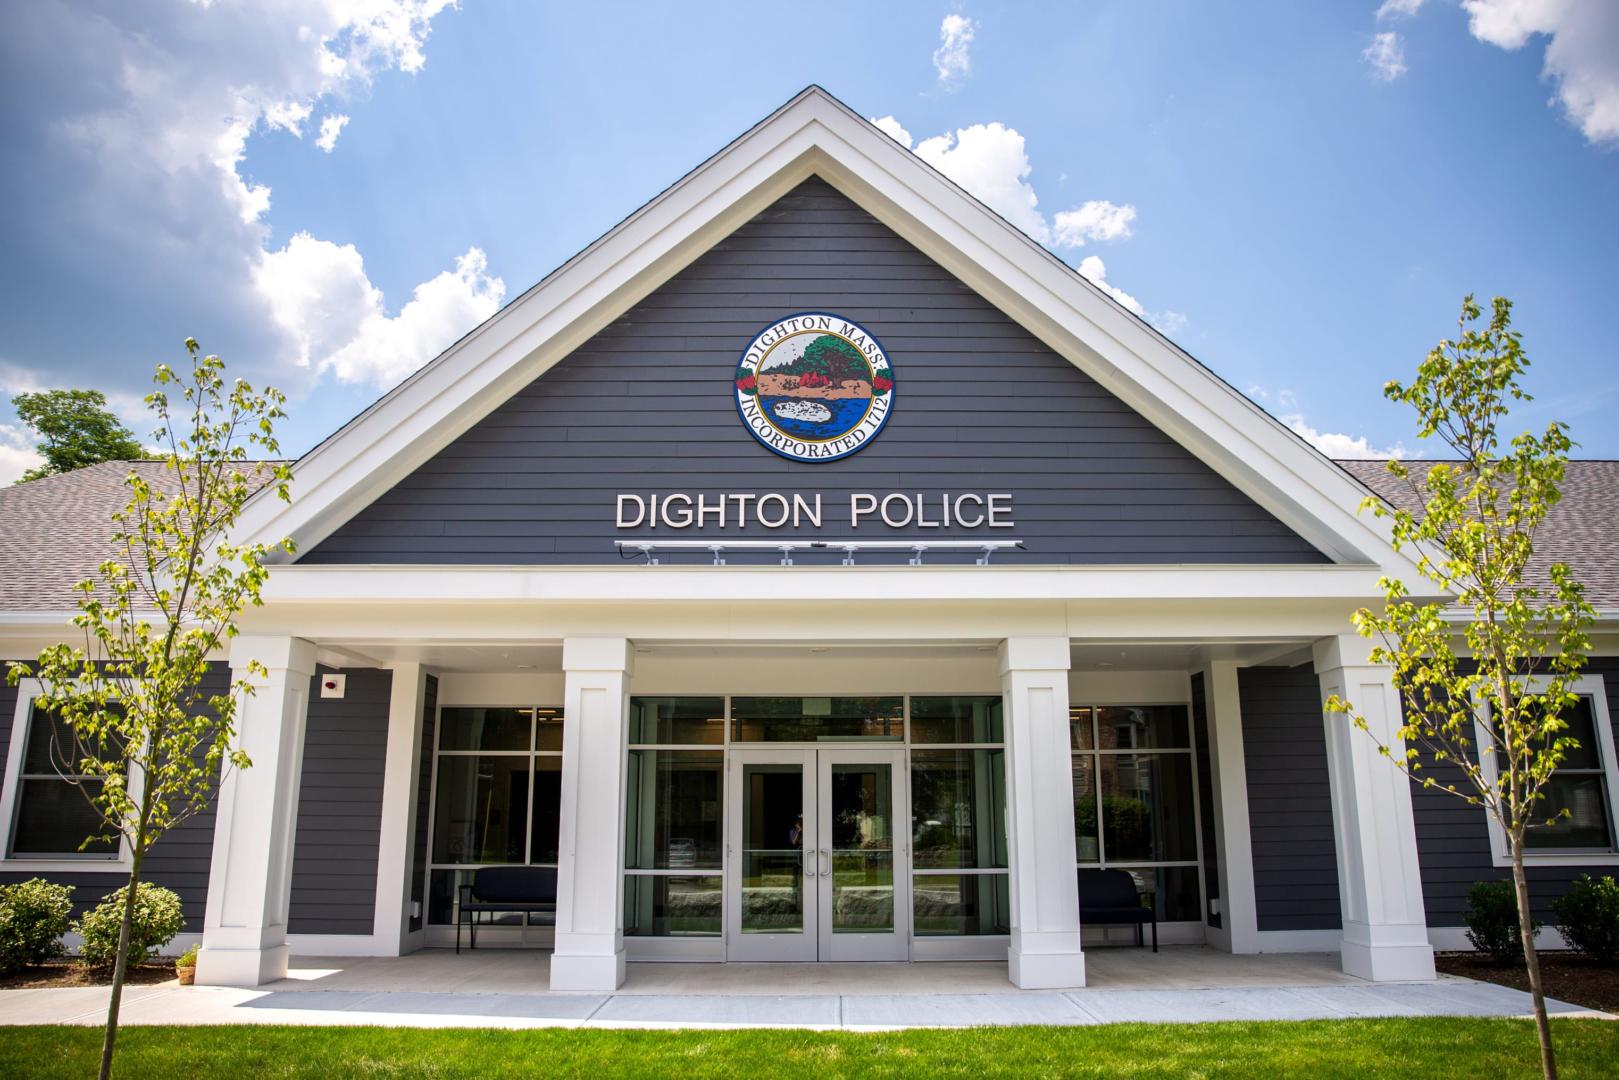 About the Dighton Police Department